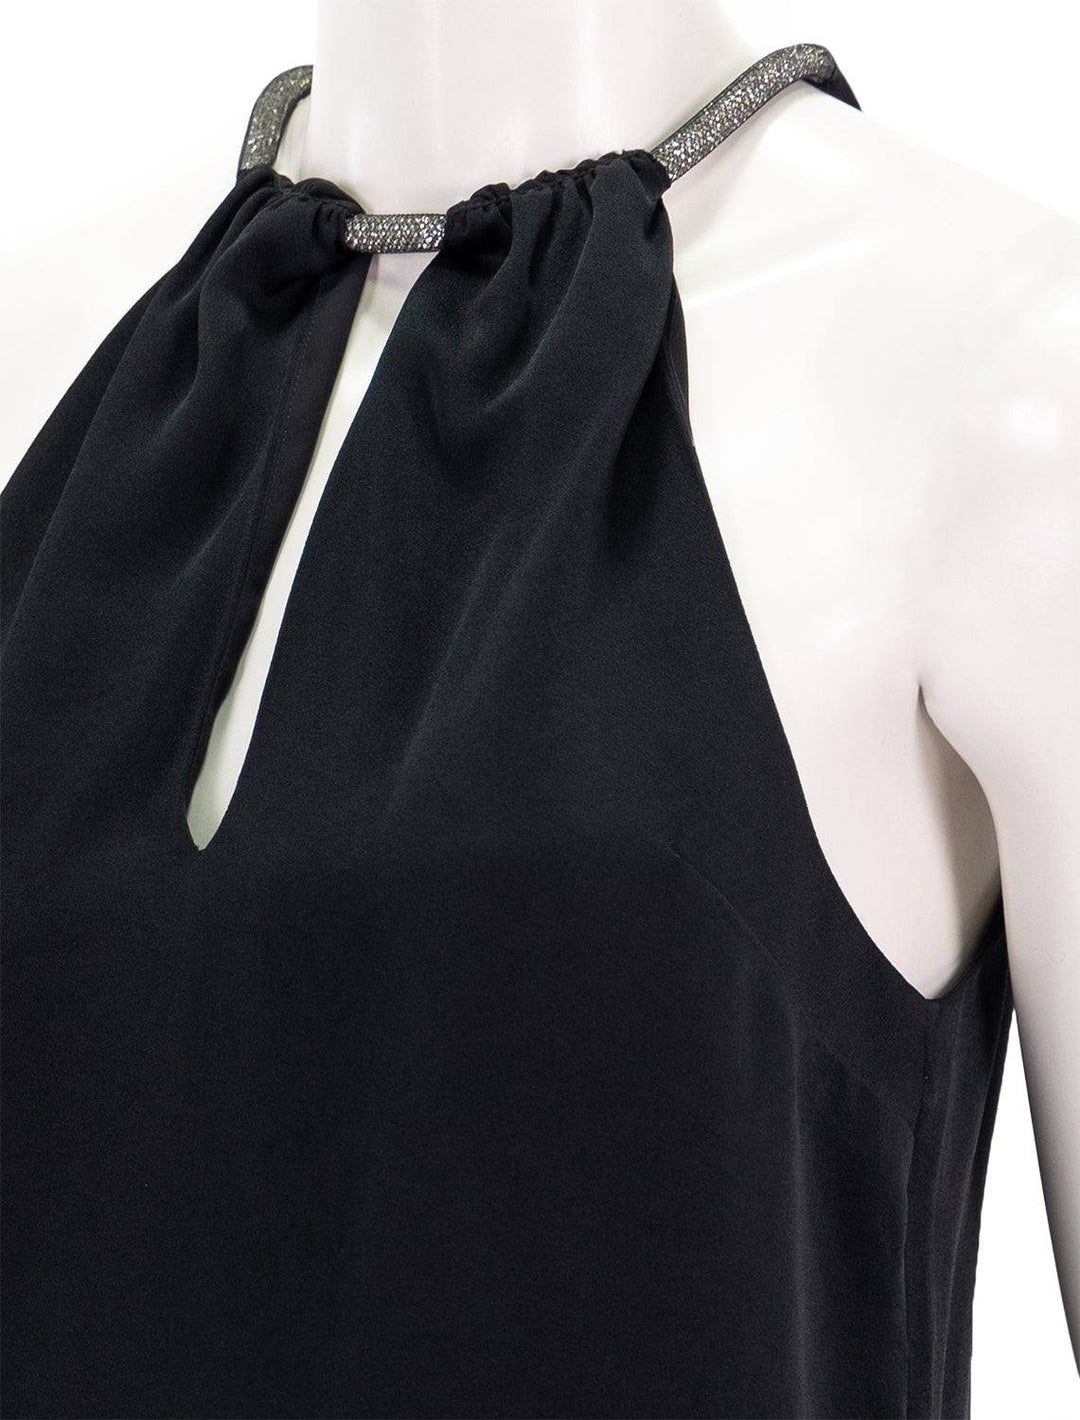 Close-up view of Veronica Beard's Kusumi Top in Black.